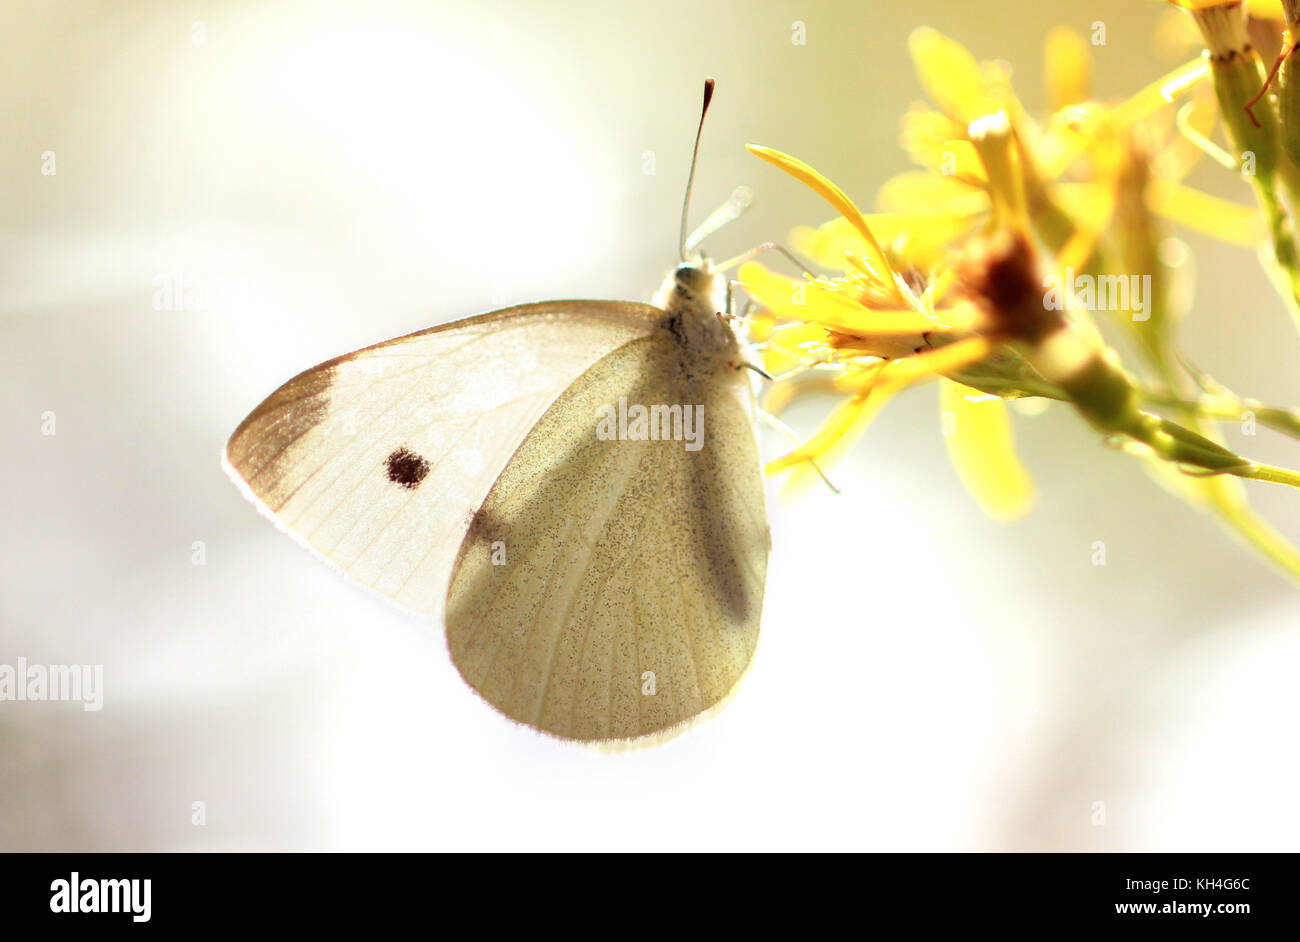 A Cabbage Small White Butterfly sips nectar from a wildflower in Austria. Diffused and blurry light sparkles in the background. Stock Photo